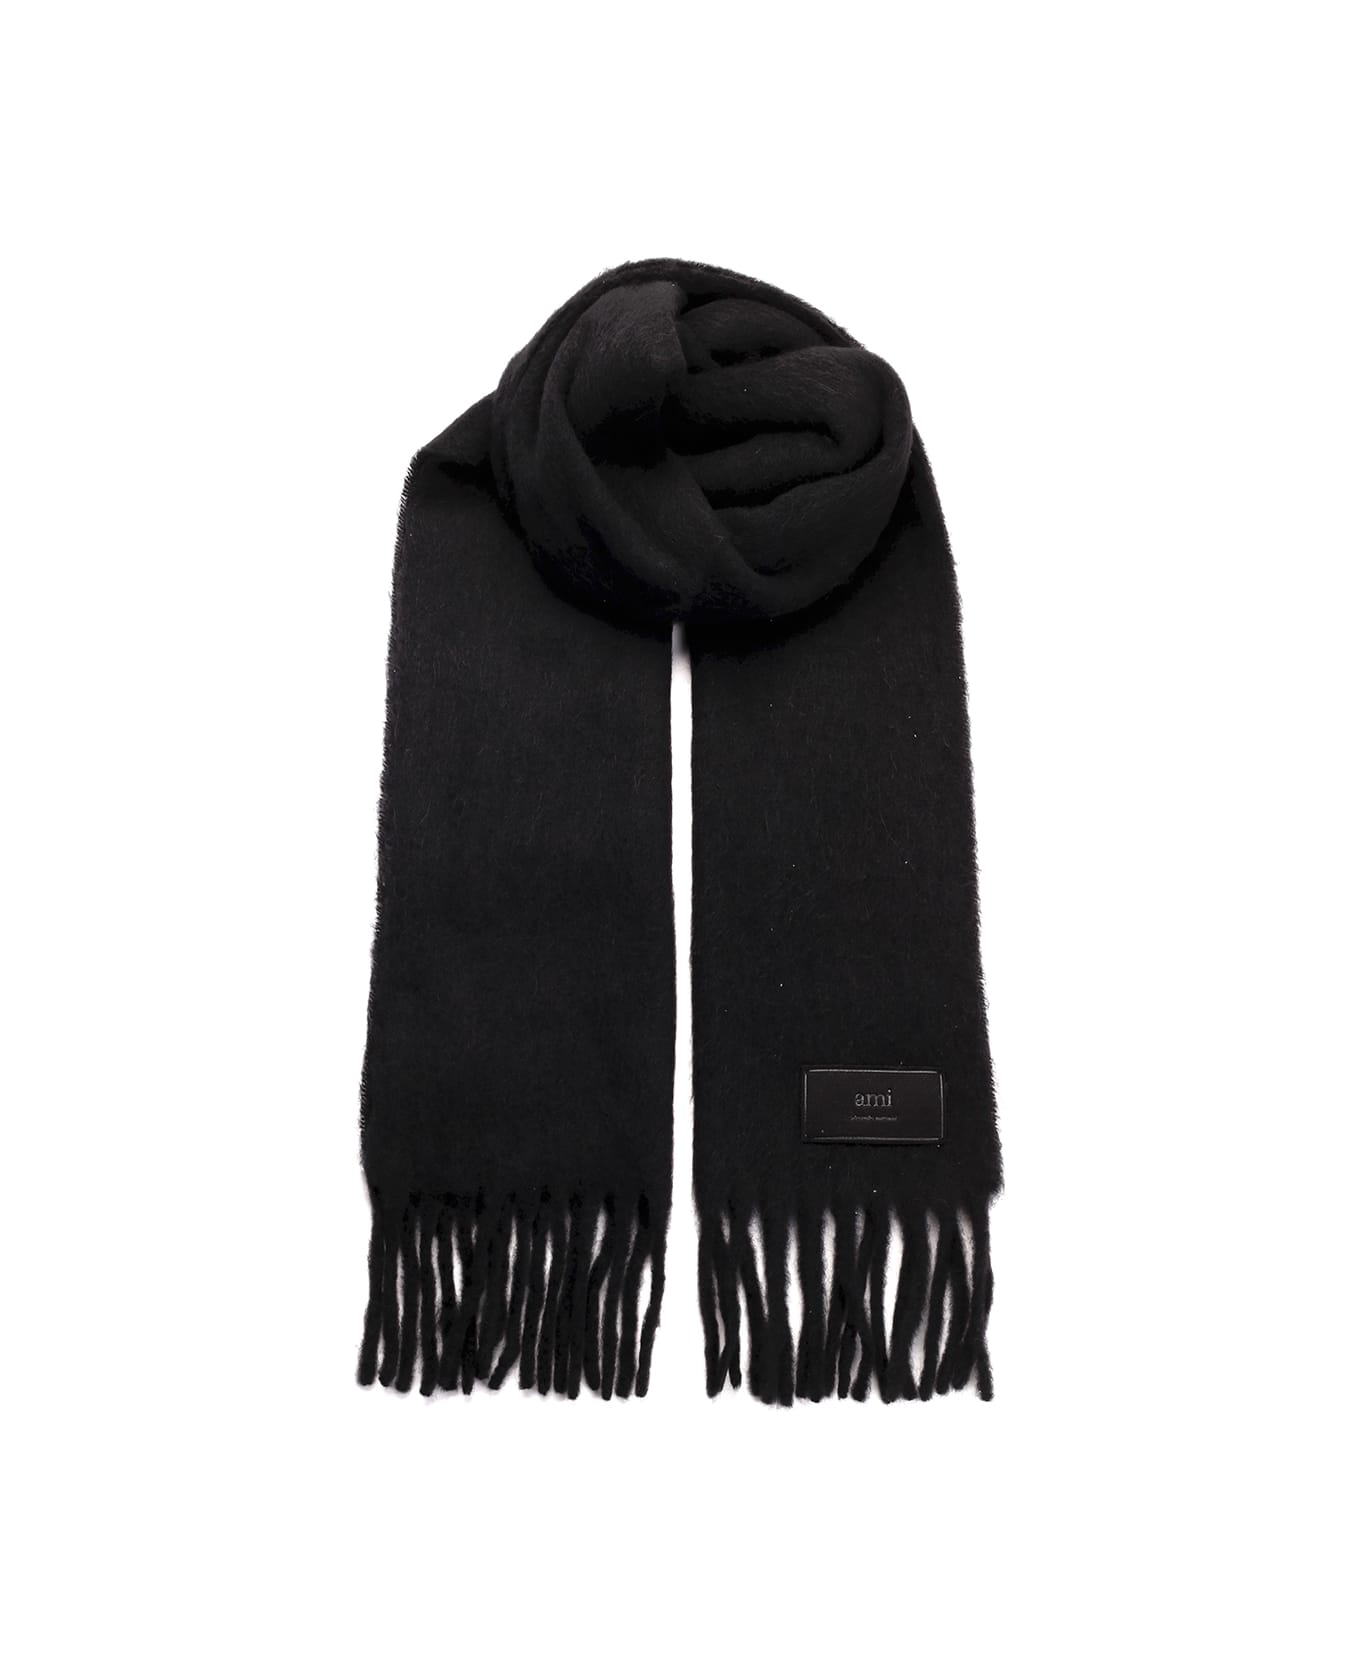 Ami Alexandre Mattiussi Black Scarf With Fringes - WOOL TRICONTINE BLACK